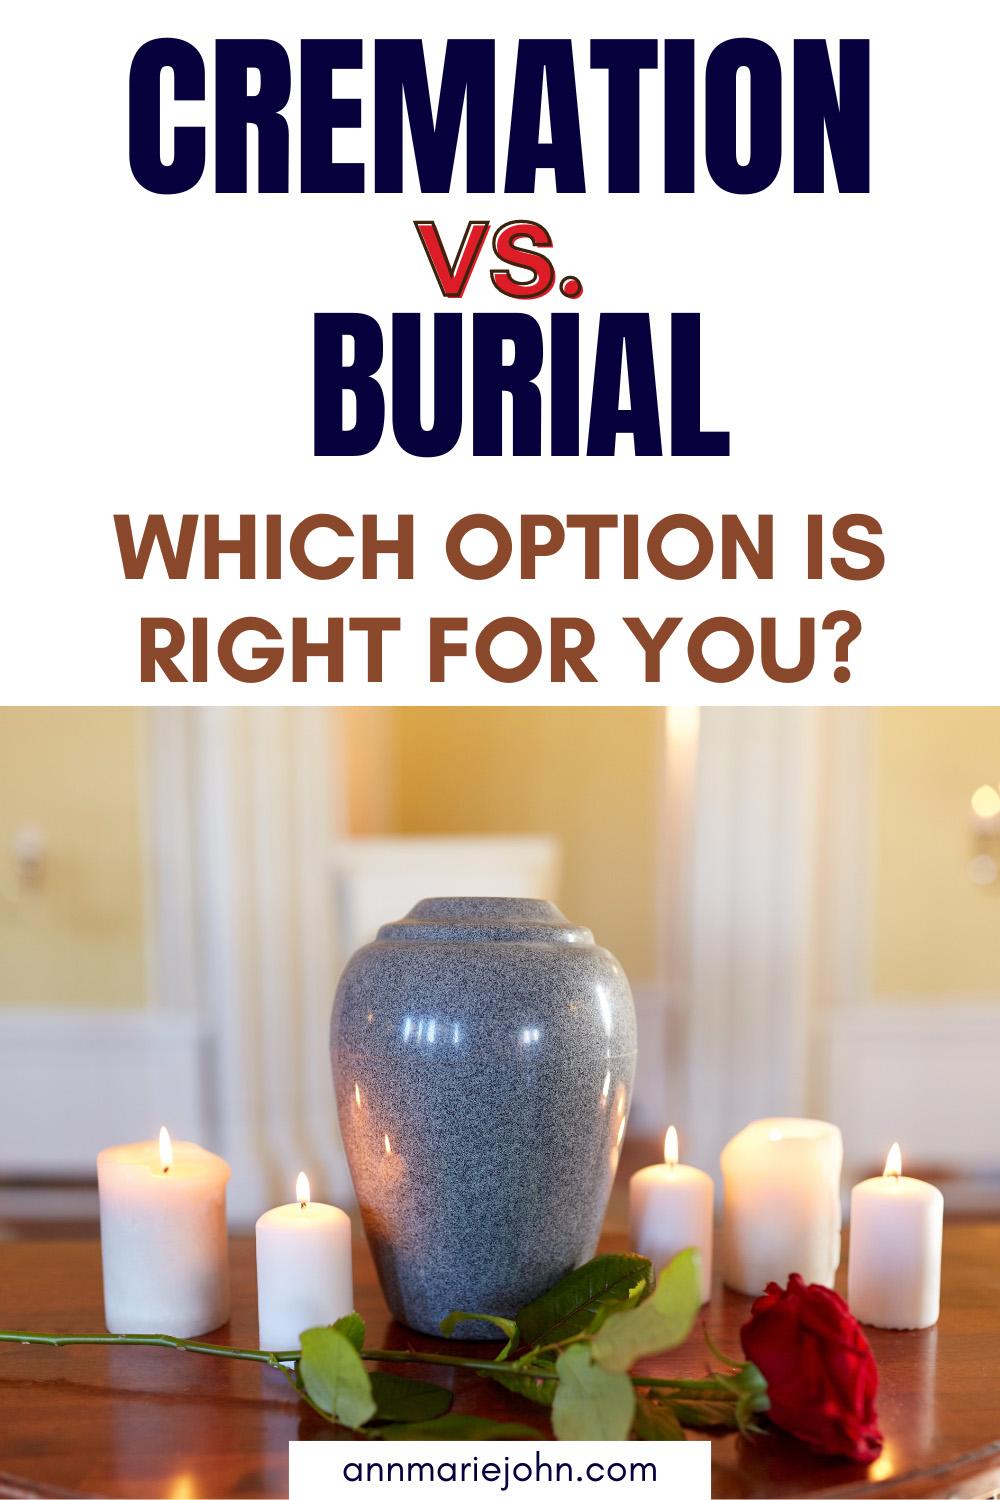 Cremation vs Burial: Which Option is Right for You?